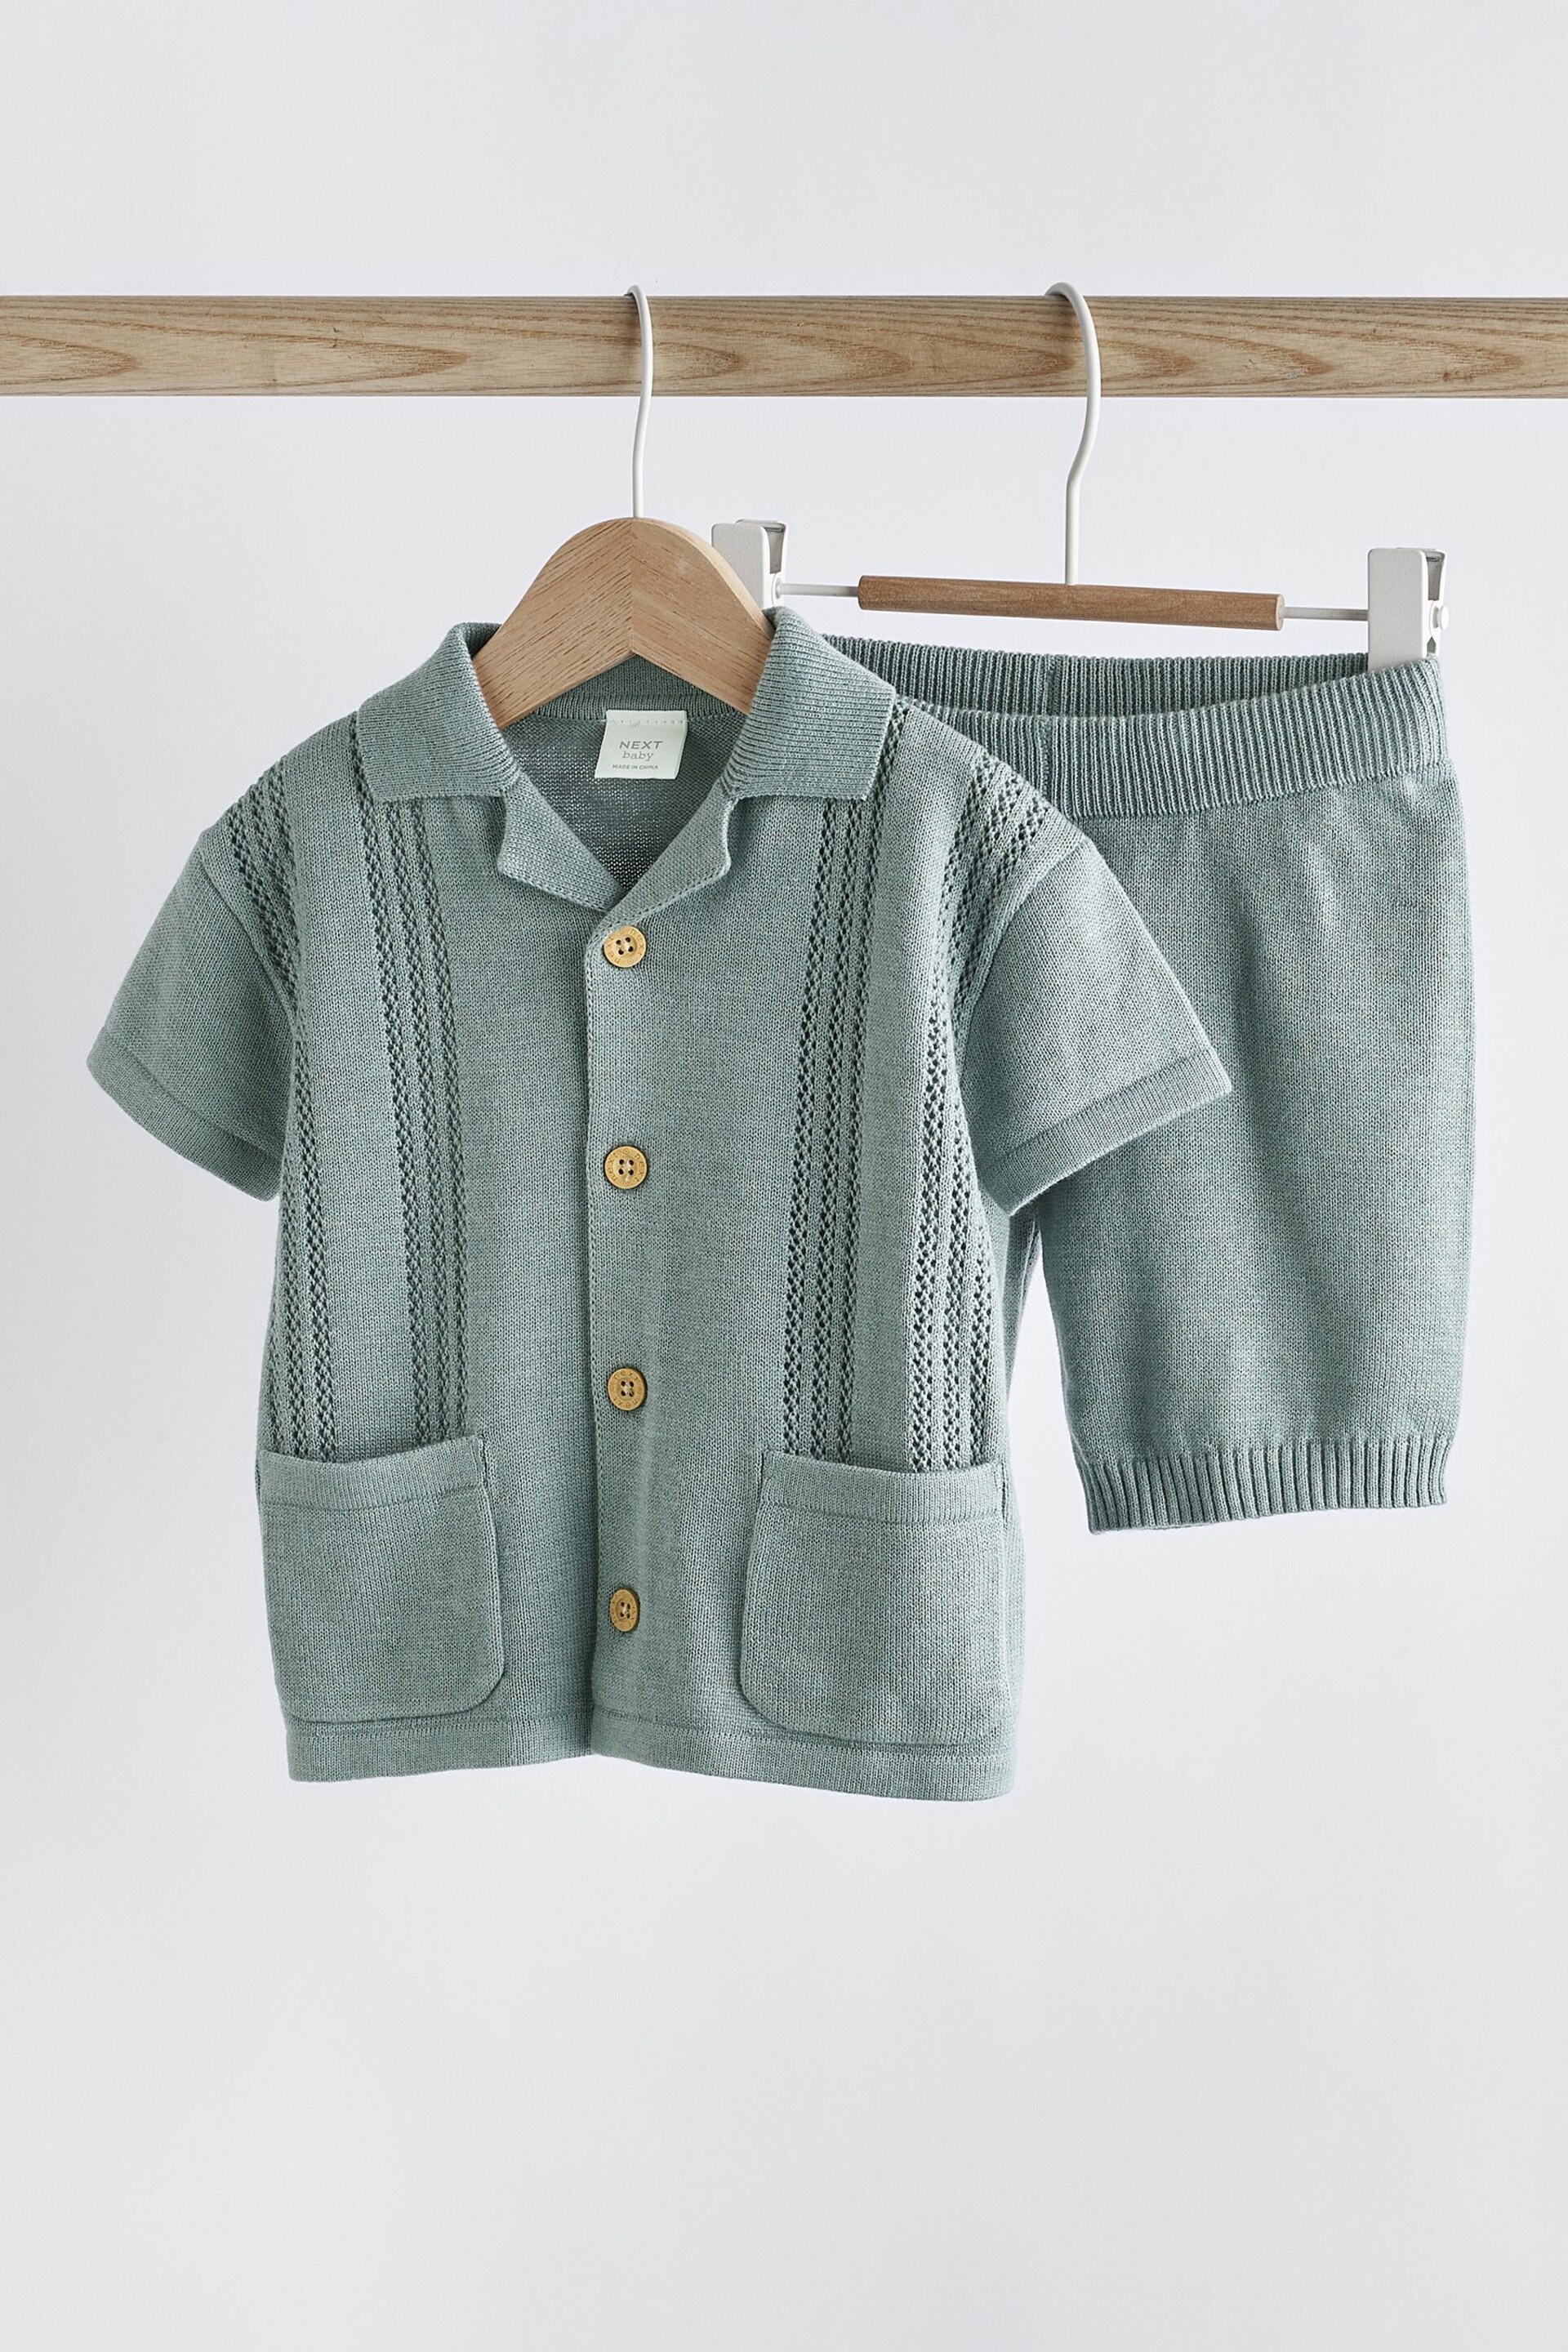 Blue Knitted Baby Shirt And Shorts Set (0mths-2yrs) - Image 5 of 11